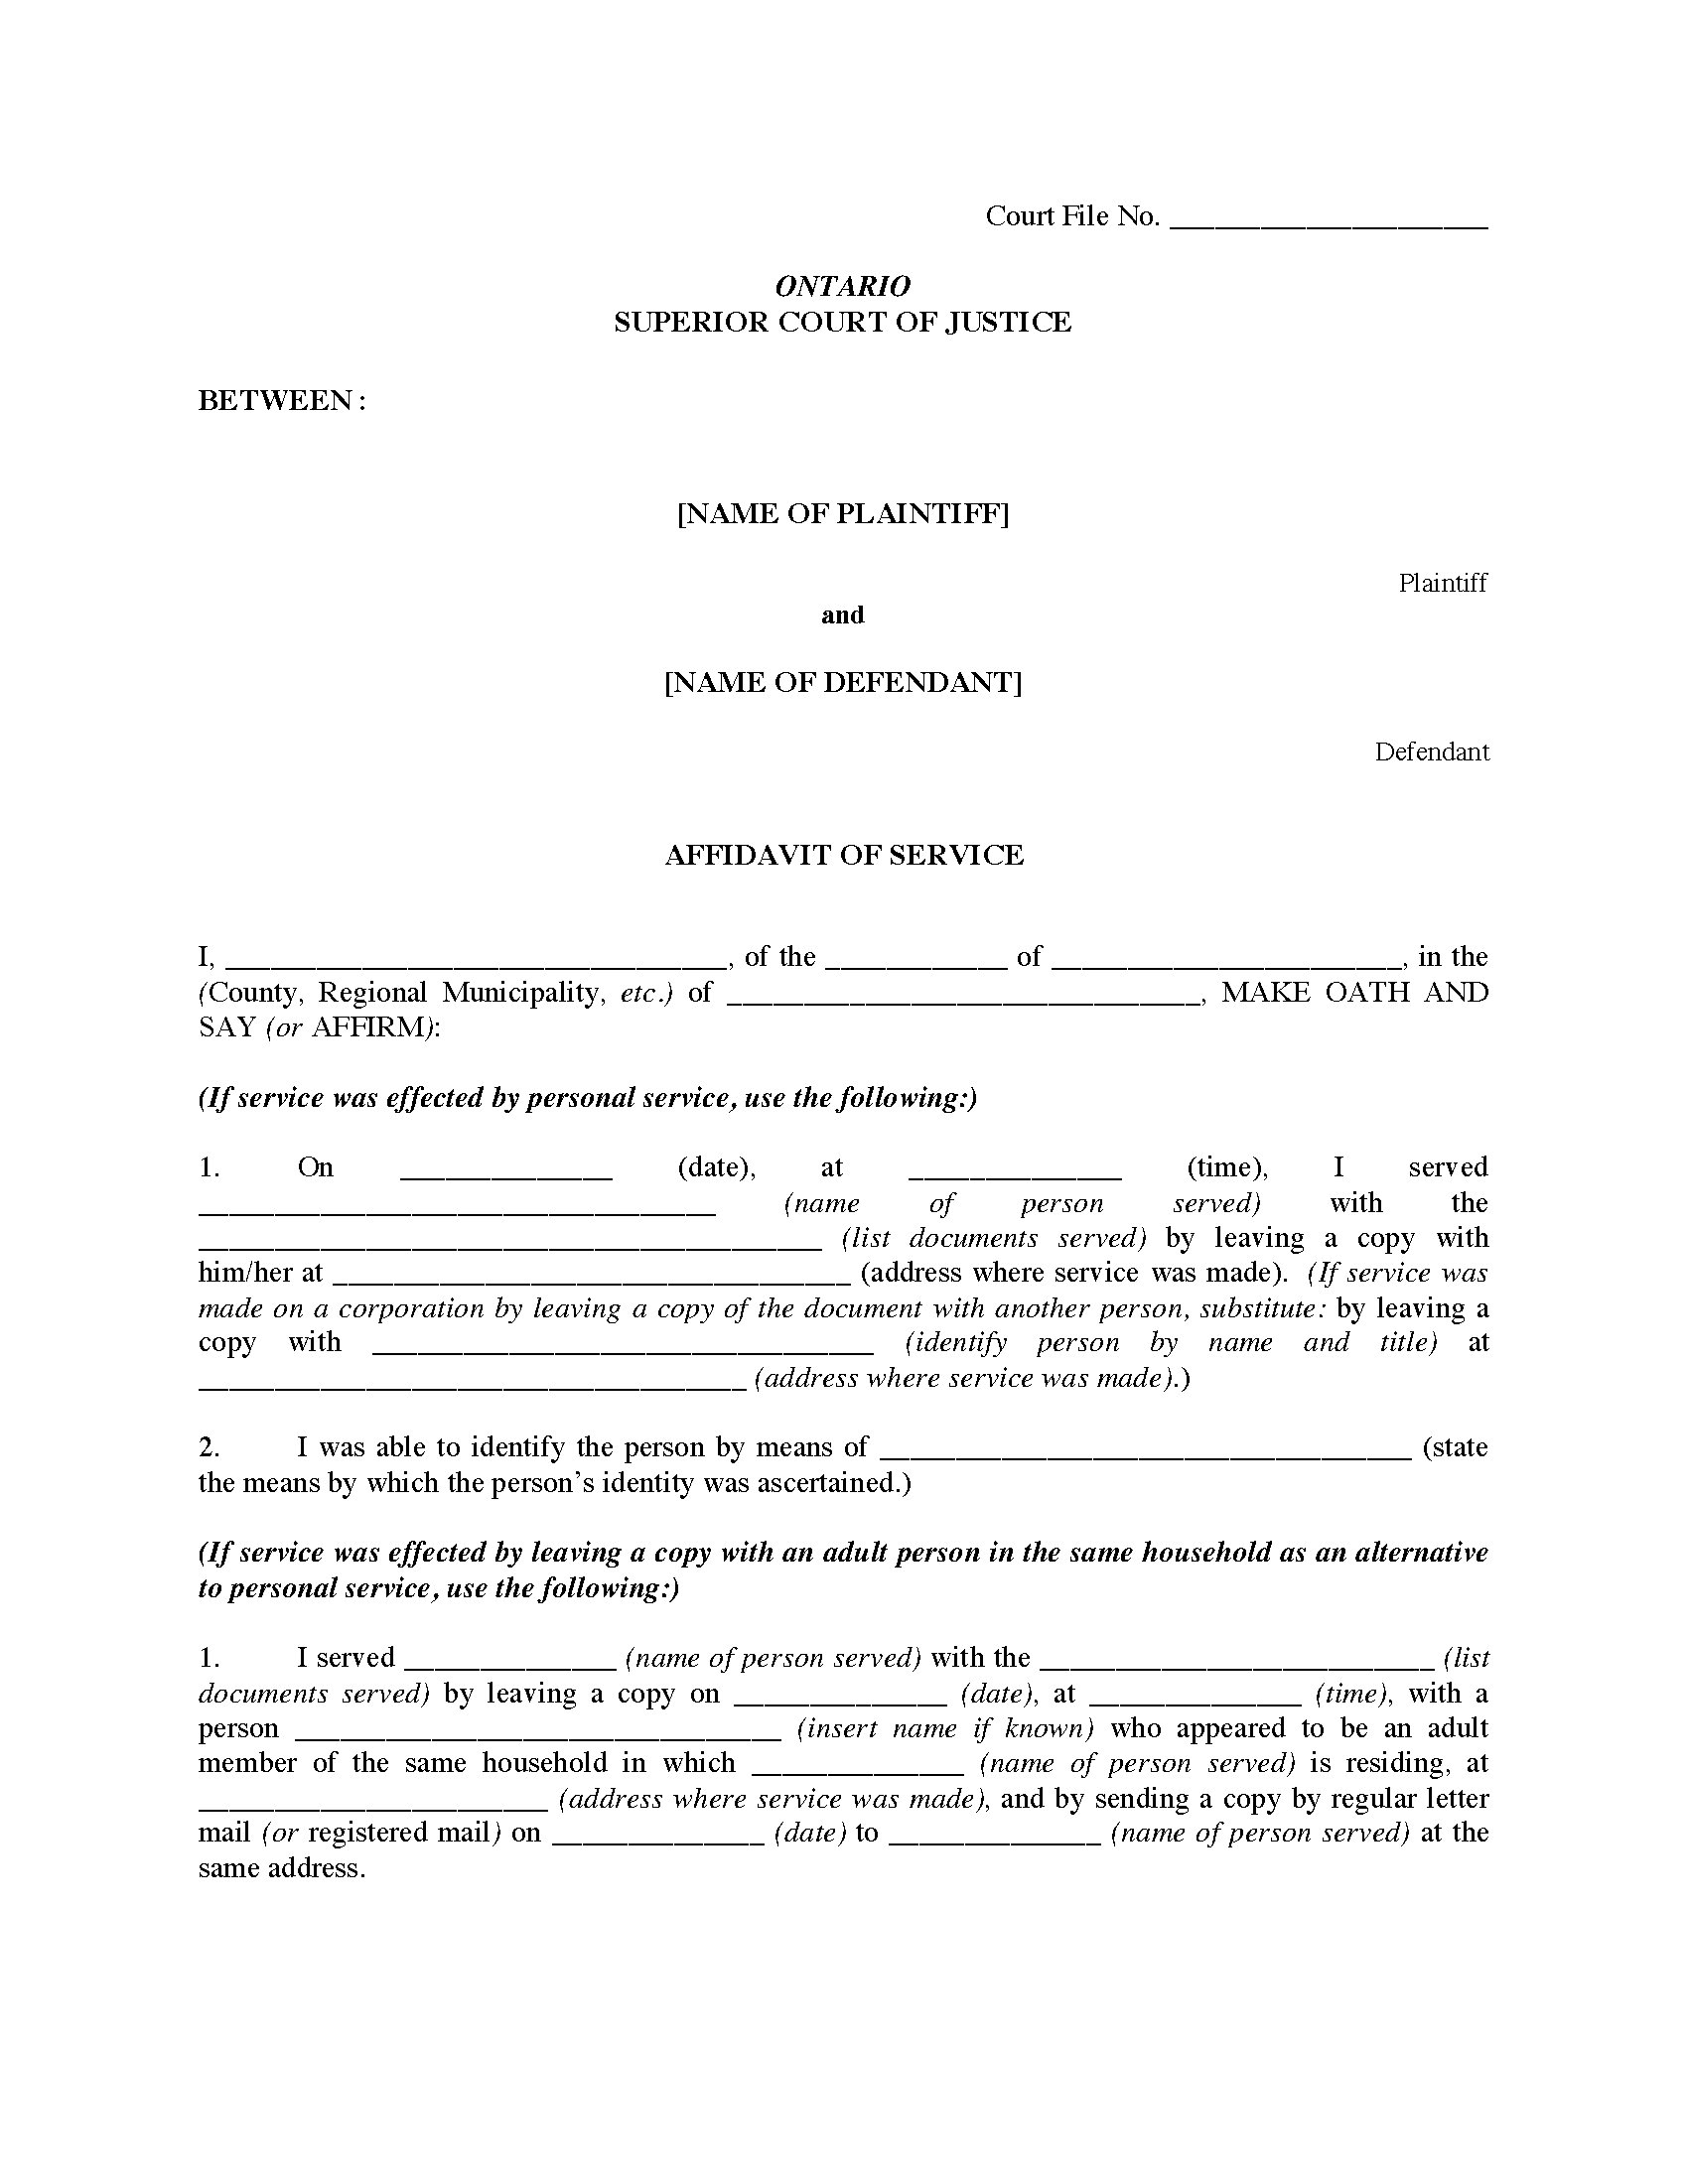 ontario-affidavit-of-service-form-legal-forms-and-business-templates